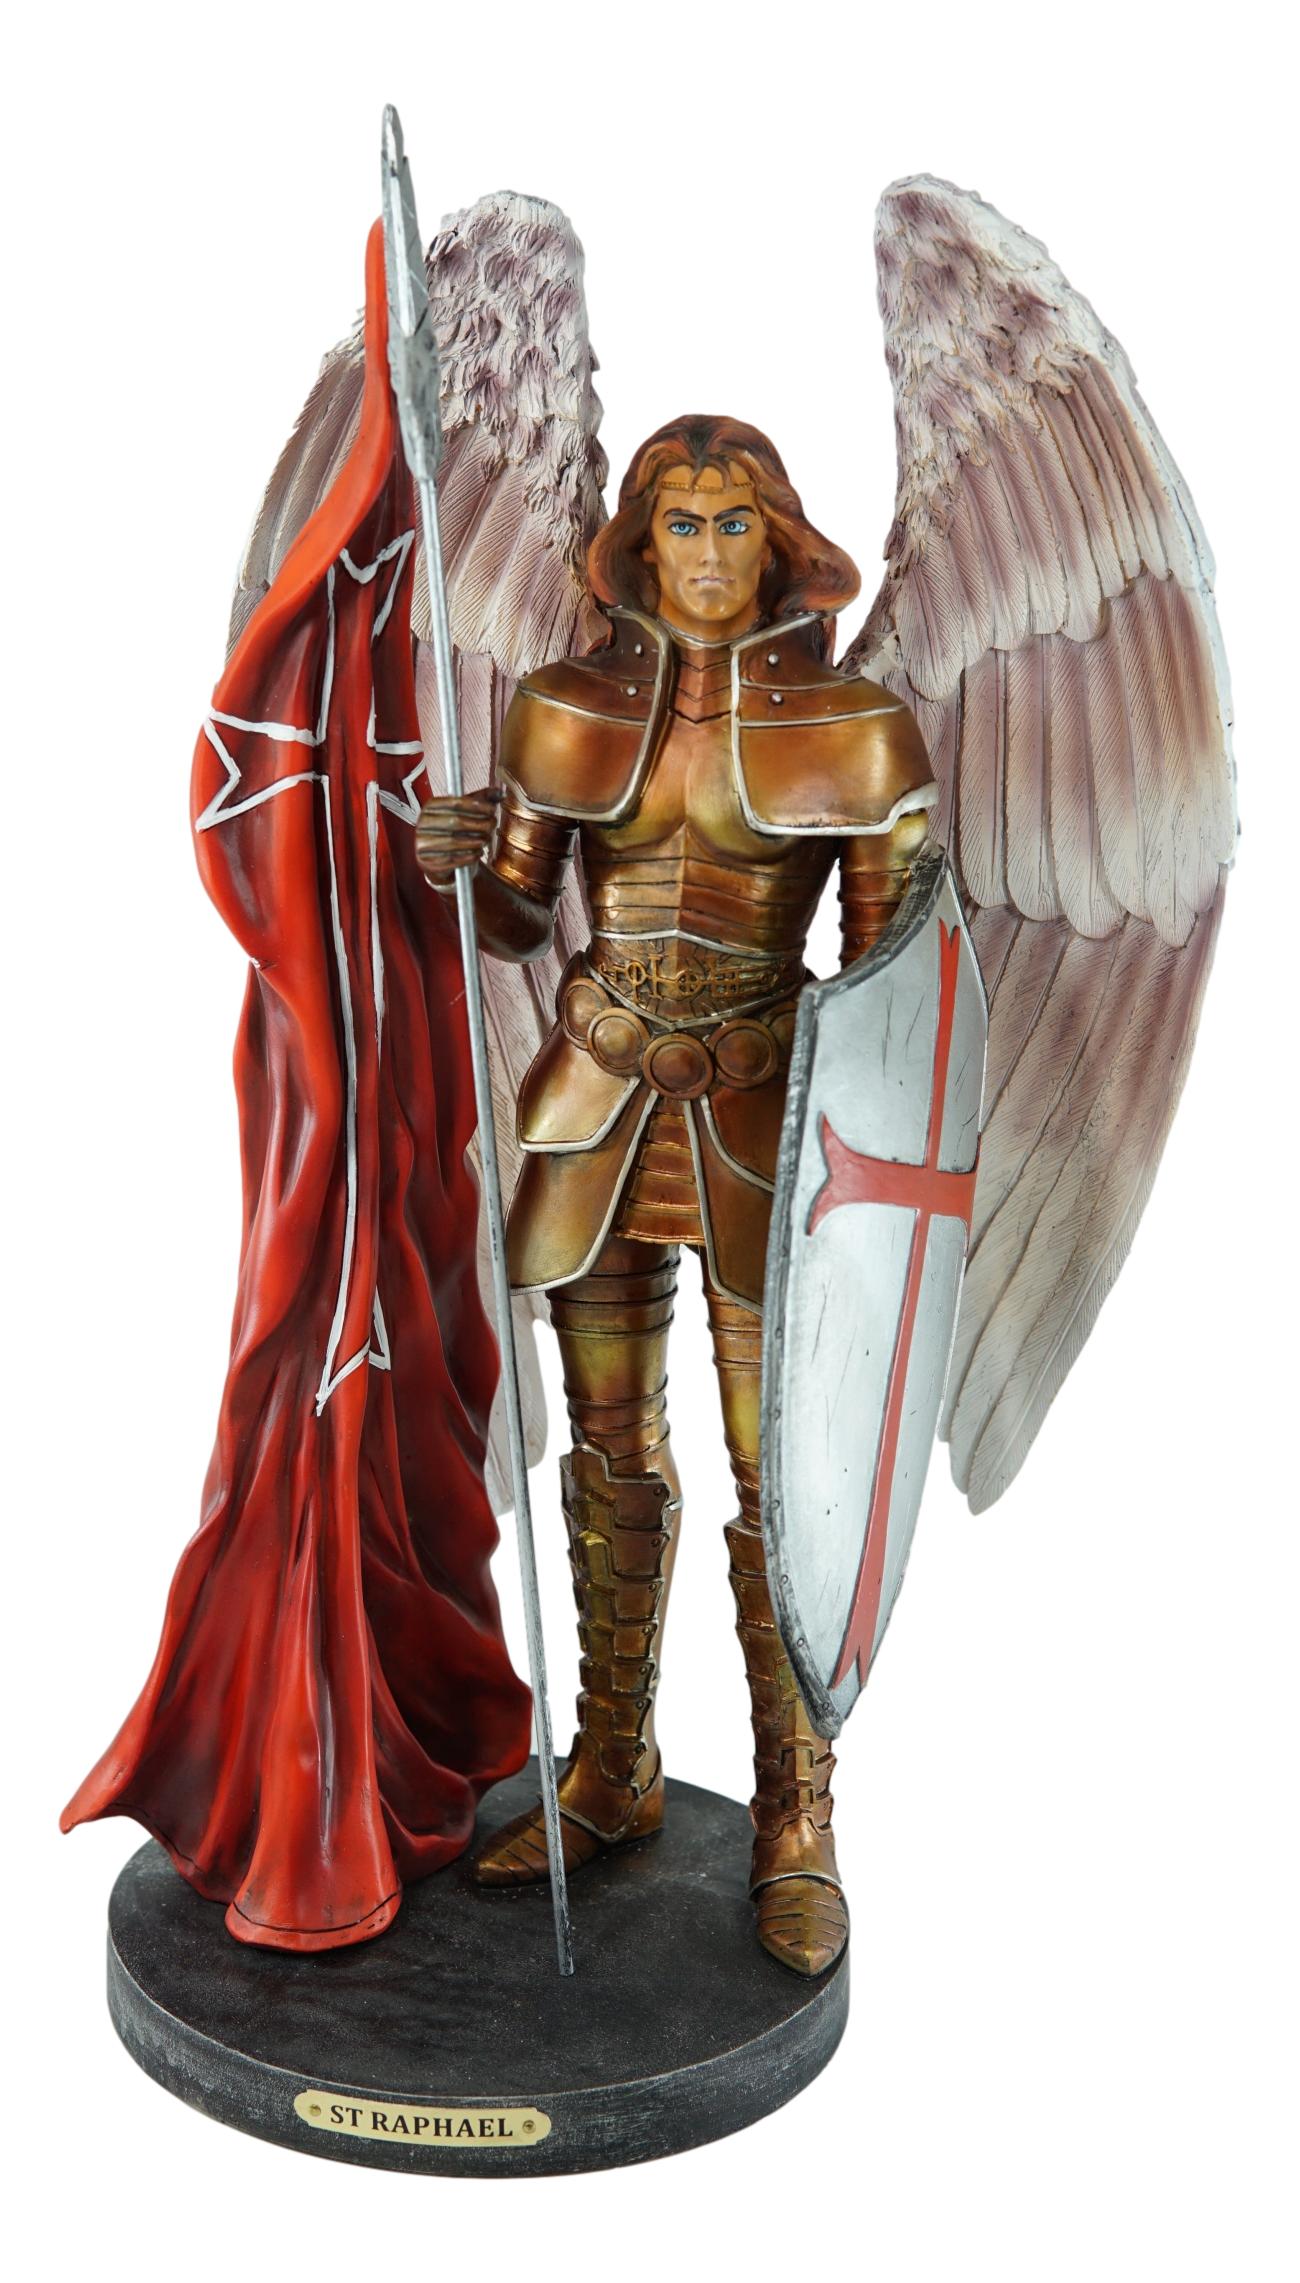 Ebros Large Archangel Saint Raphael With Spear And Faith Shield Statue - image 2 of 7